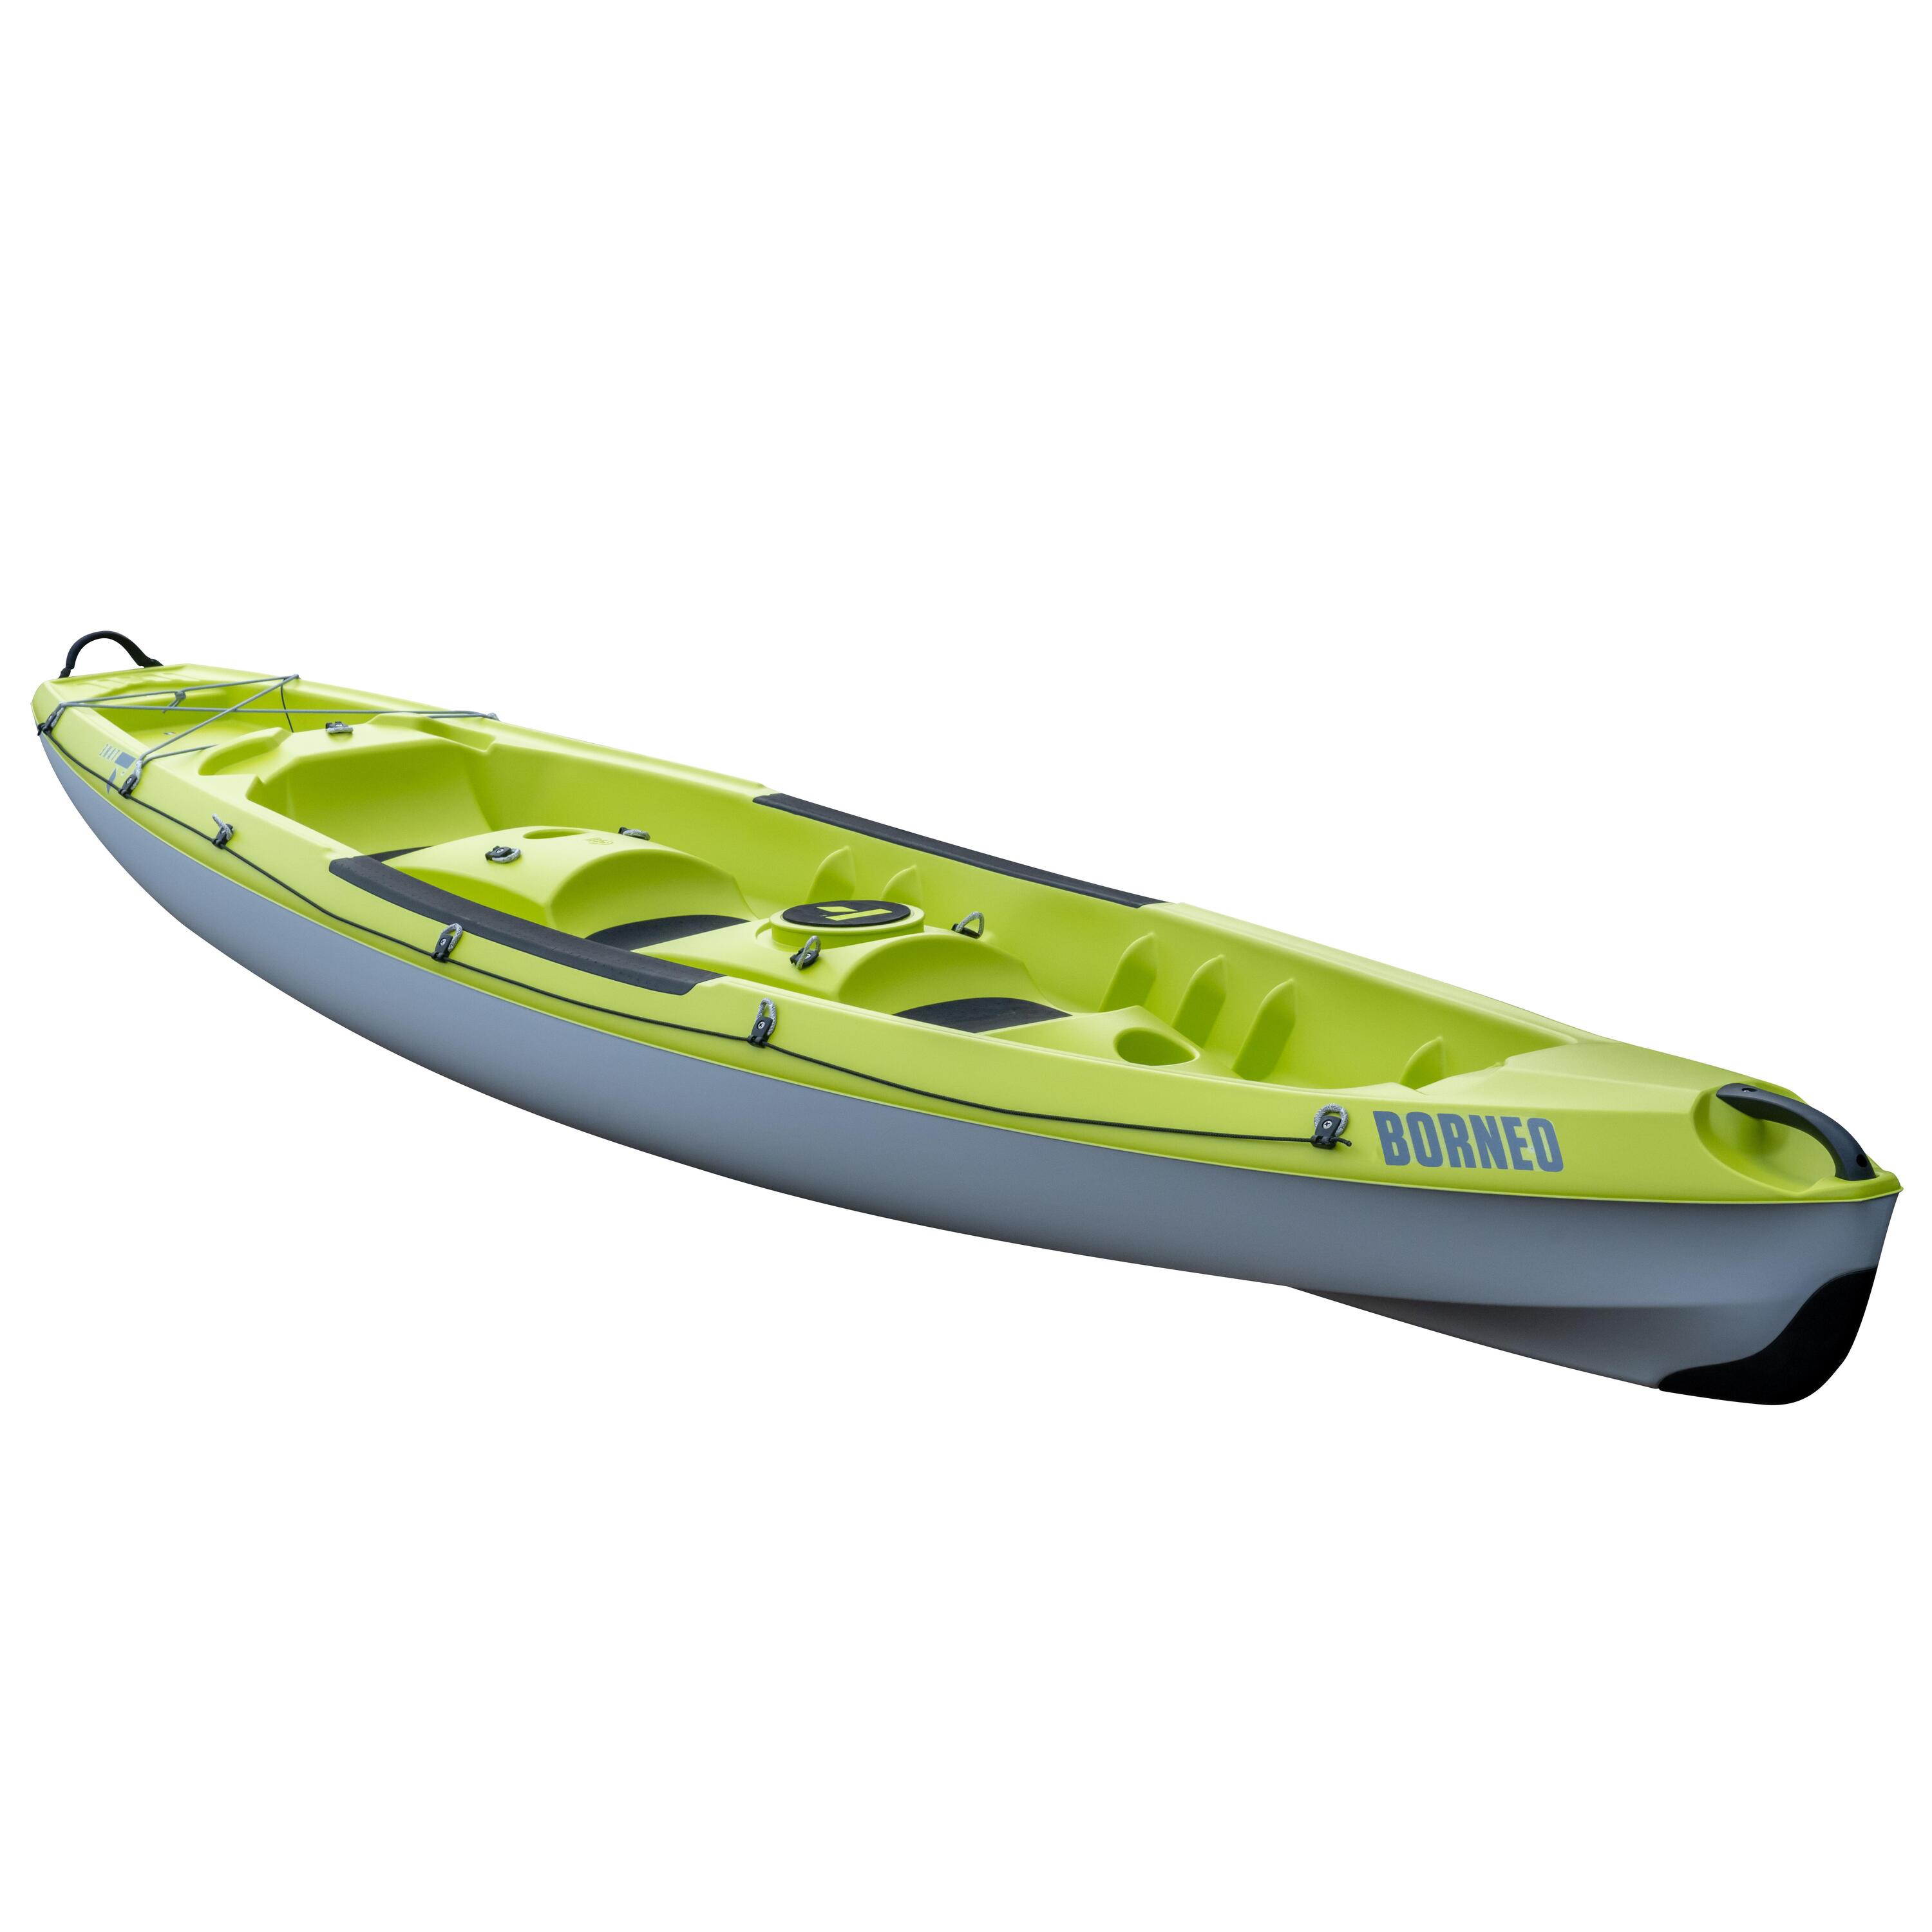 FRONT HANDLE FOR BORNEO, TOBAGO AND BILBAO KAYAKS 2/3